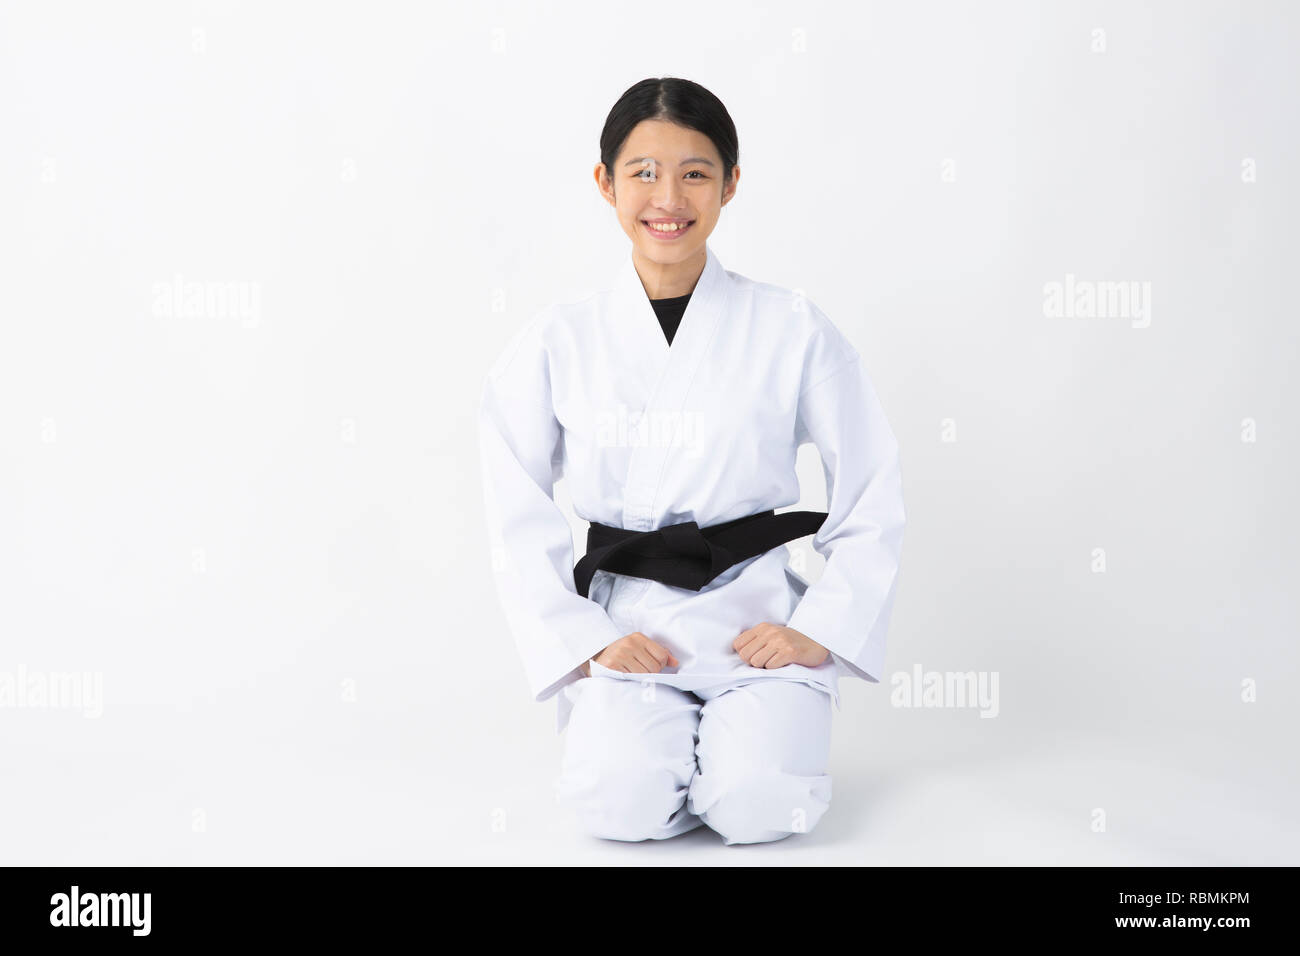 Young beautiful woman wearing karate suit sitting and smiling on white background Stock Photo